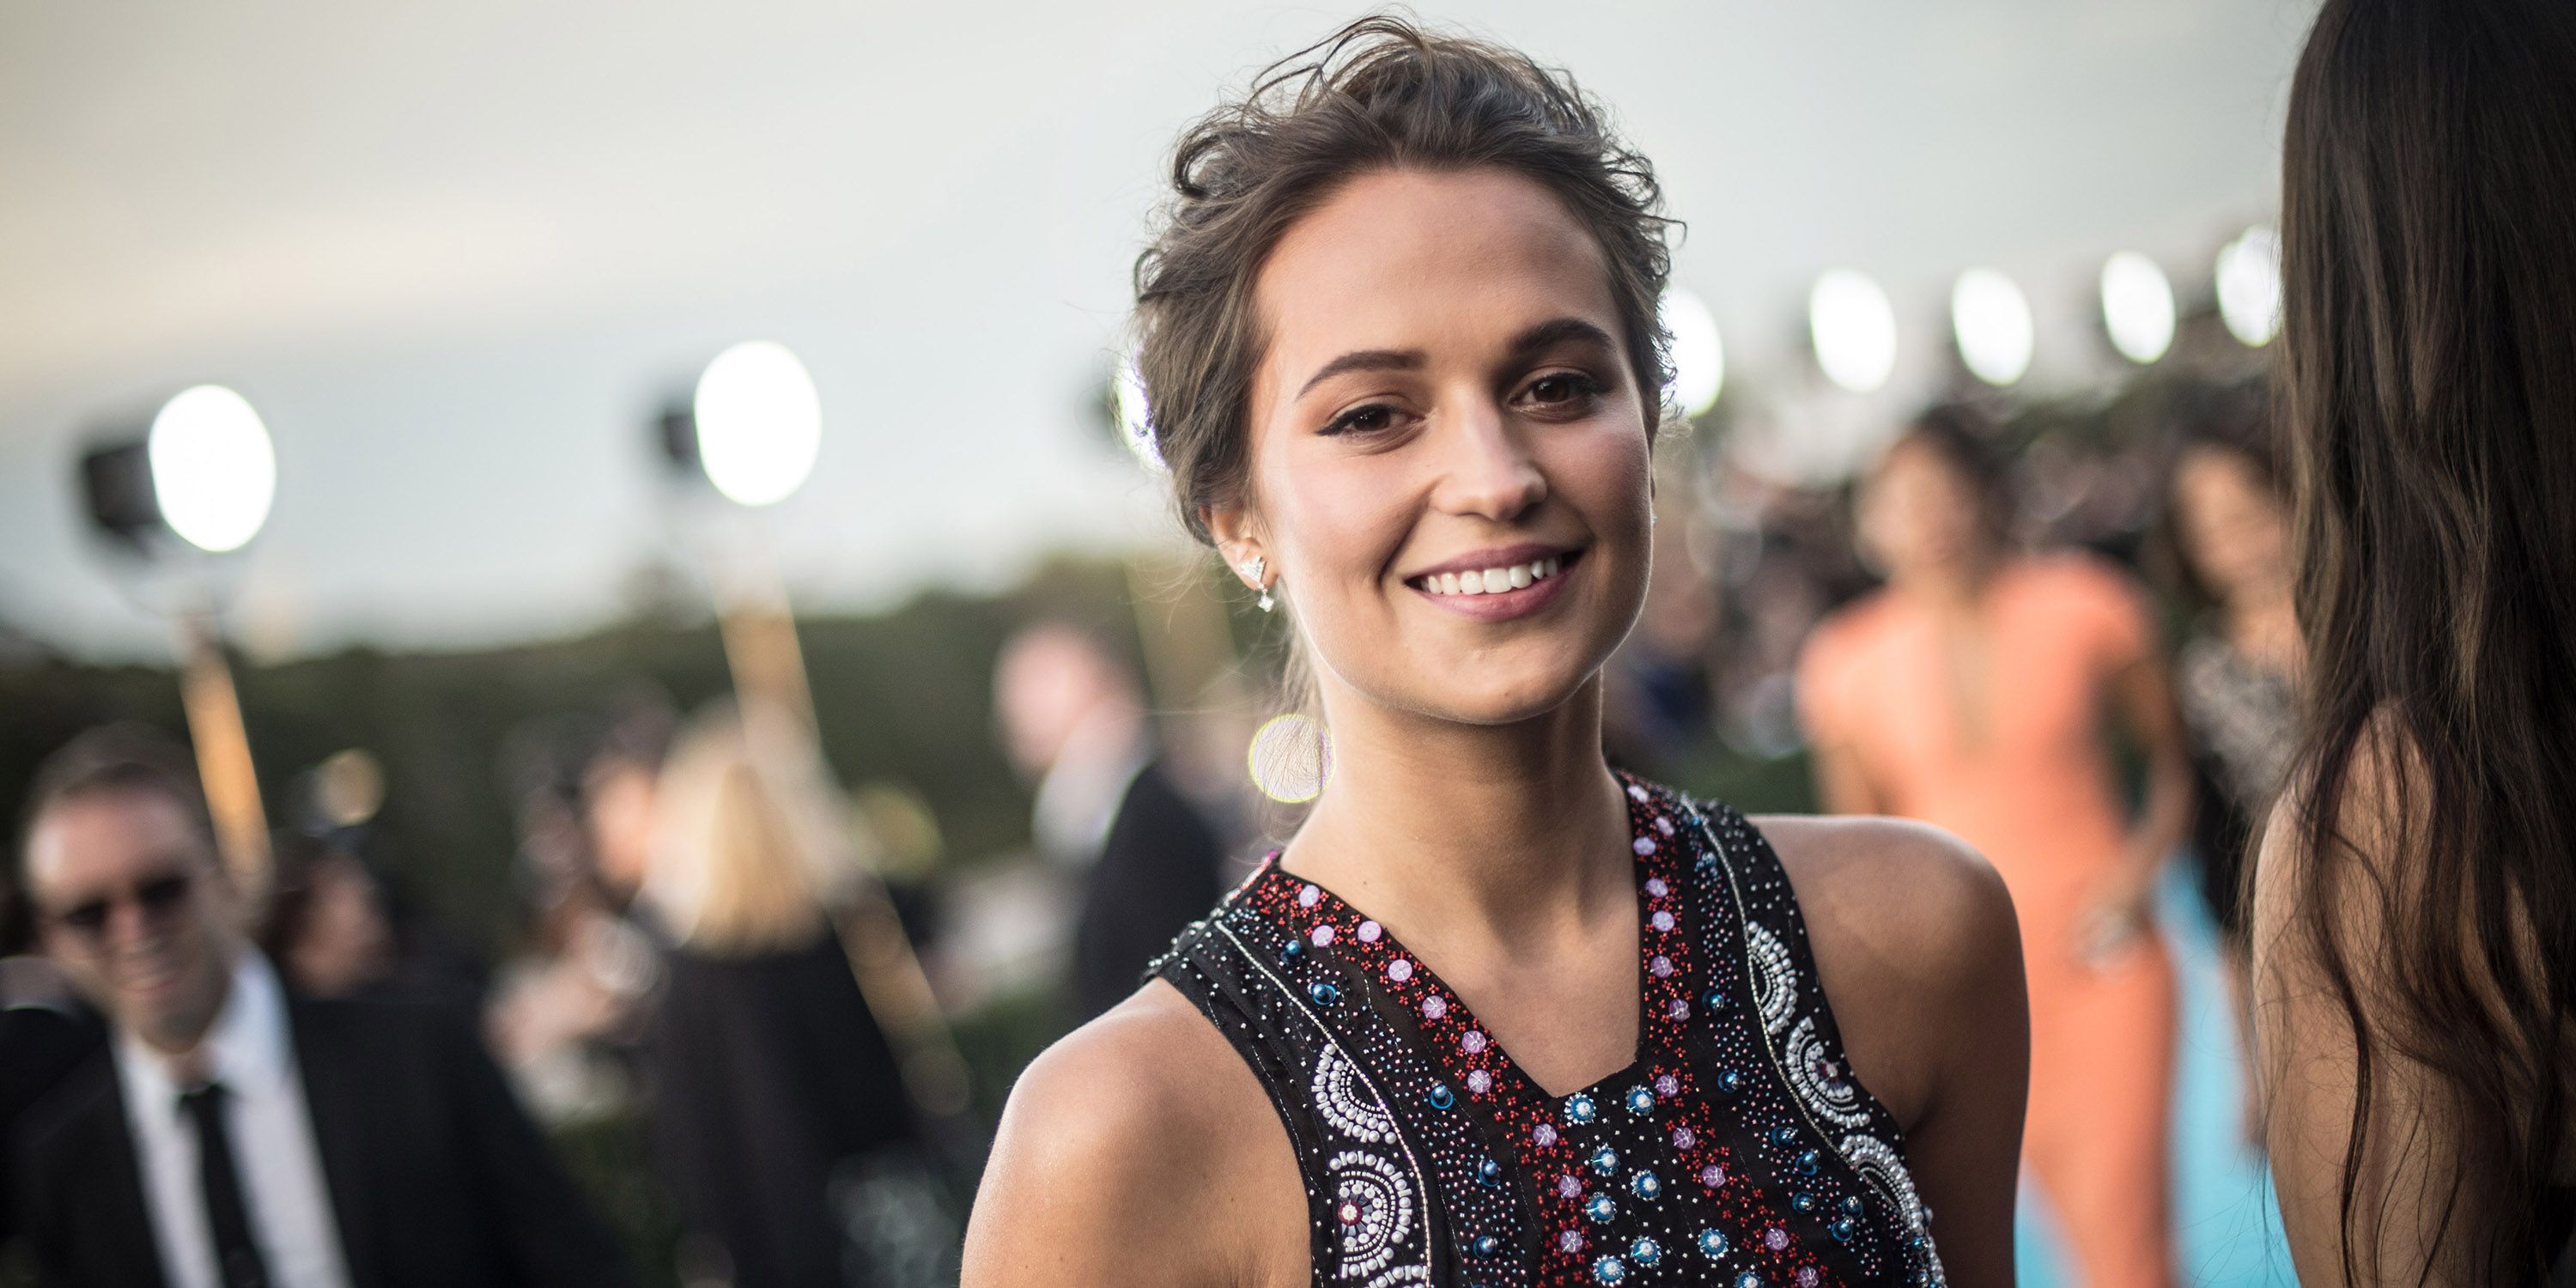 Alicia Vikander, Firebrand Star, on THR's Awards Chatter Podcast Live – The  Hollywood Reporter